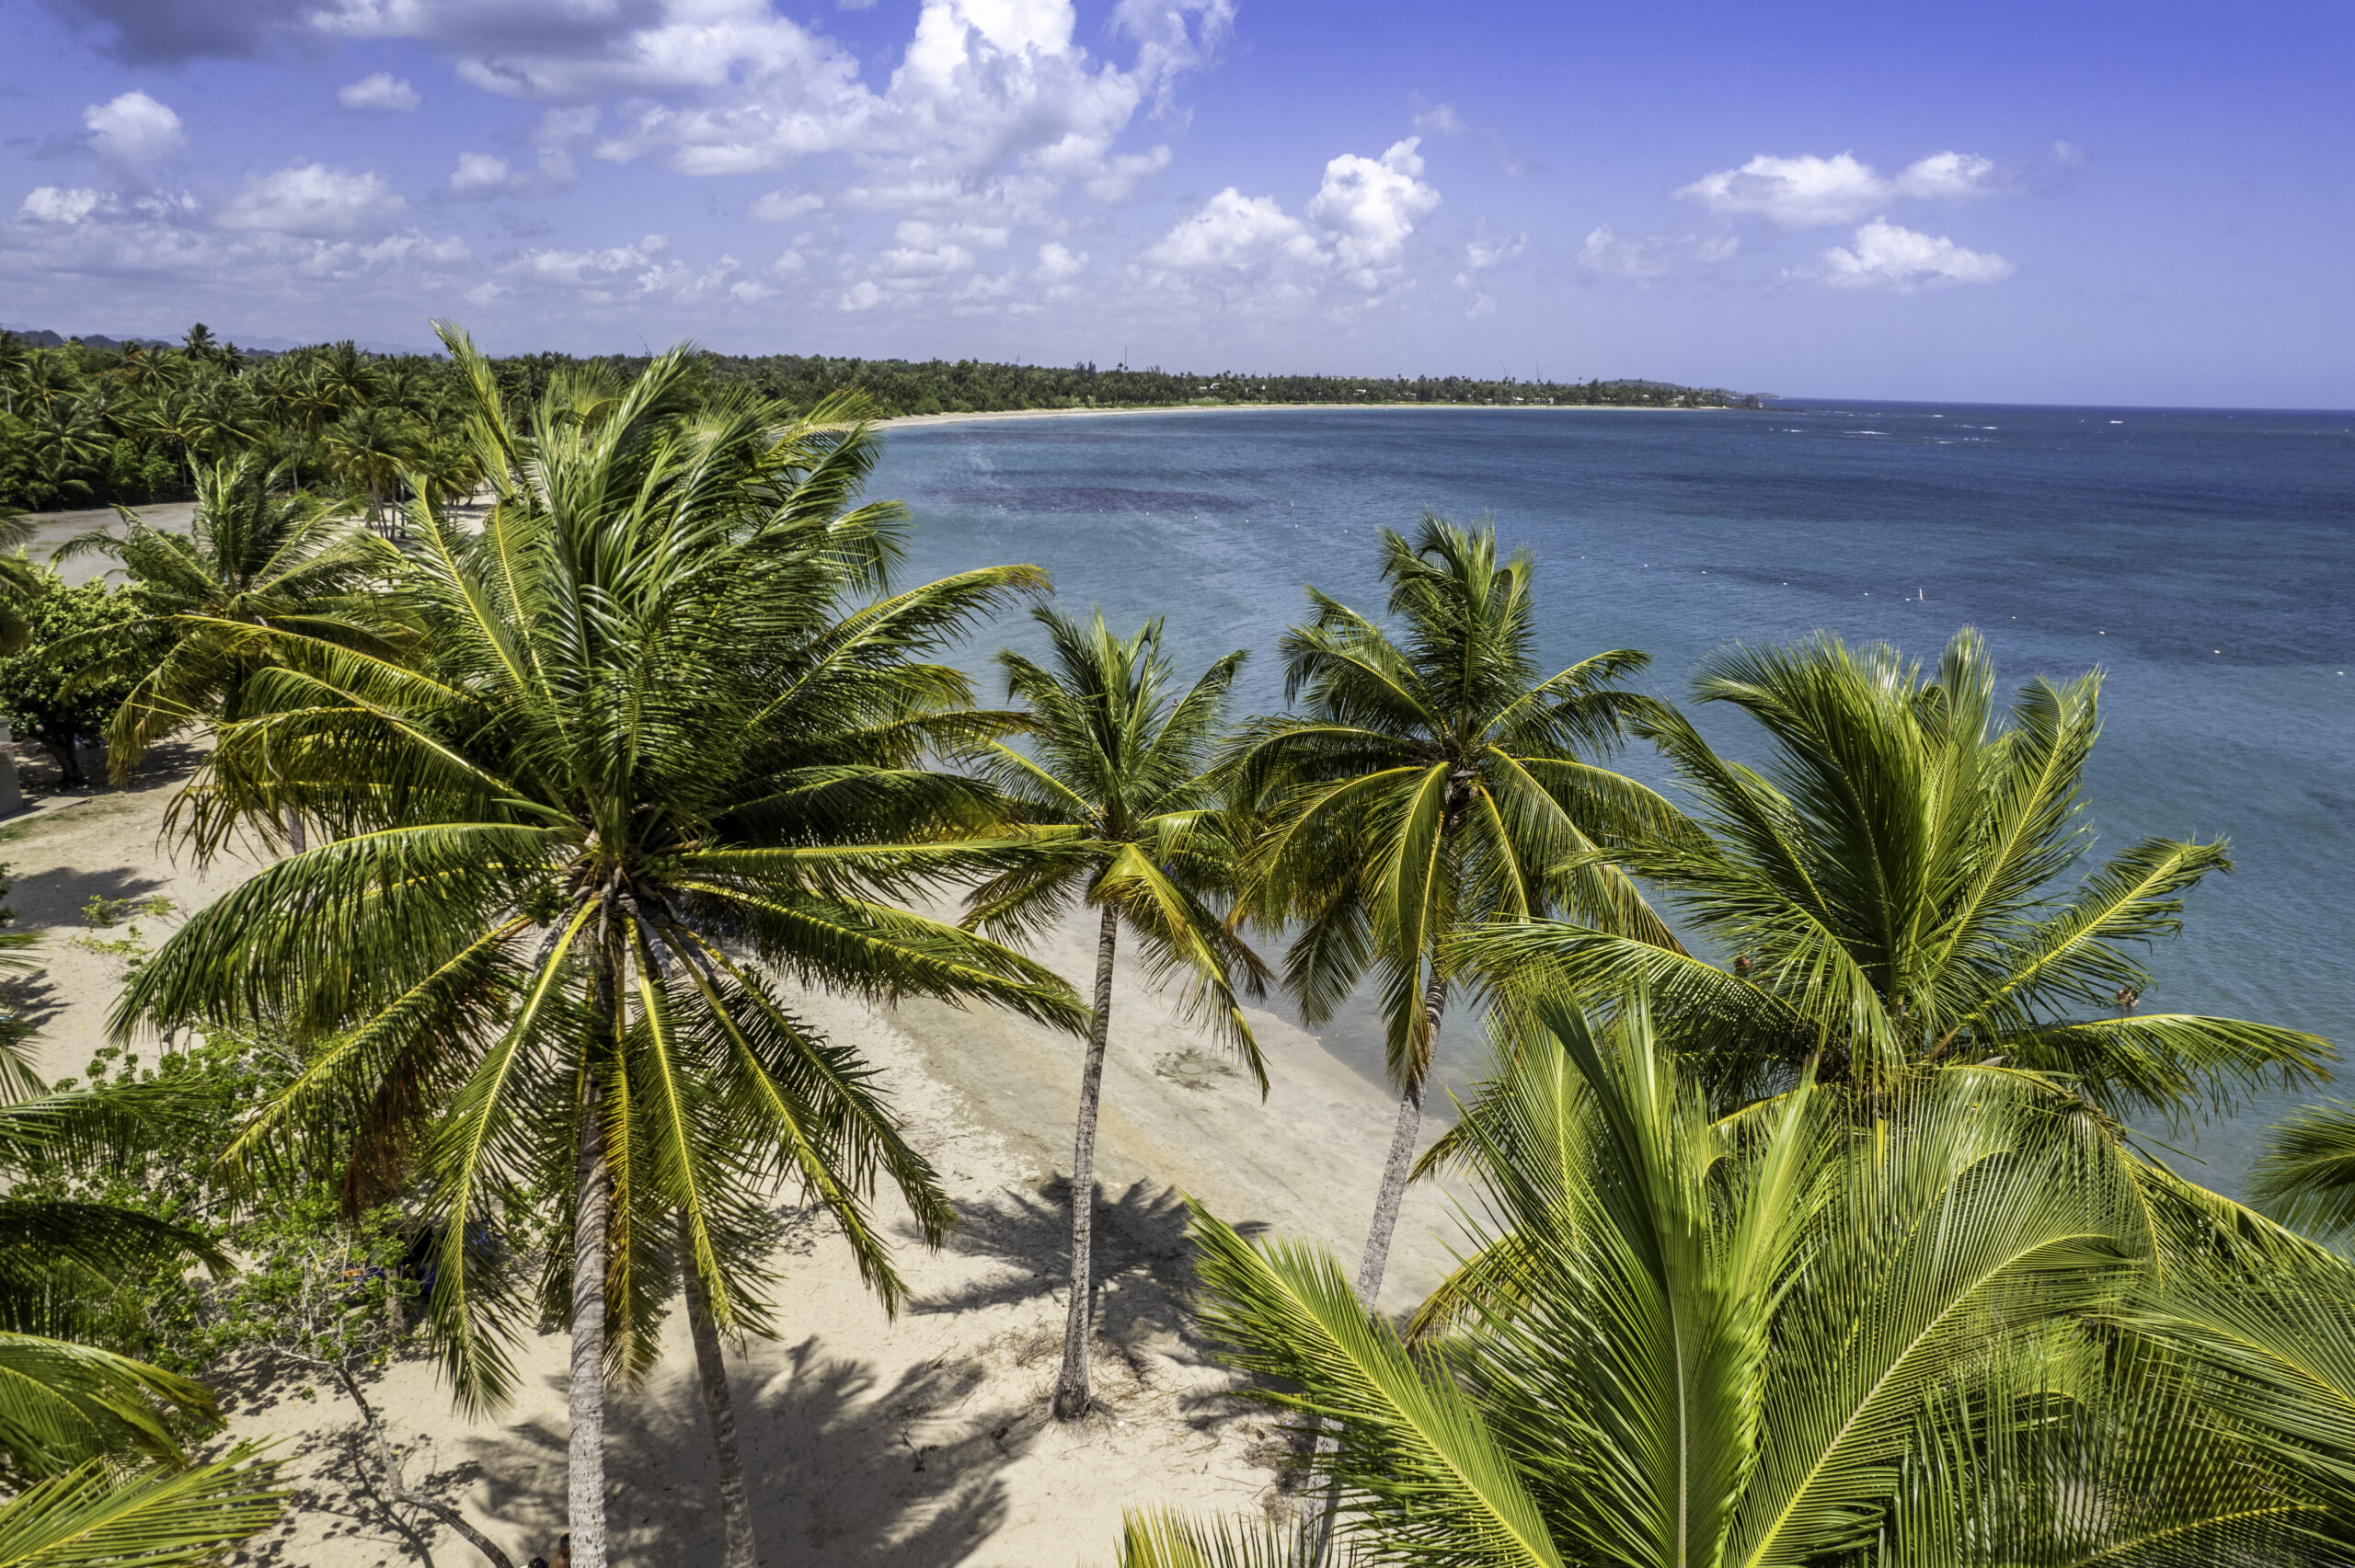 Dorado Beach in Puerto Rico. Palm trees are growing out of the sand with a thick forest behind the beach.